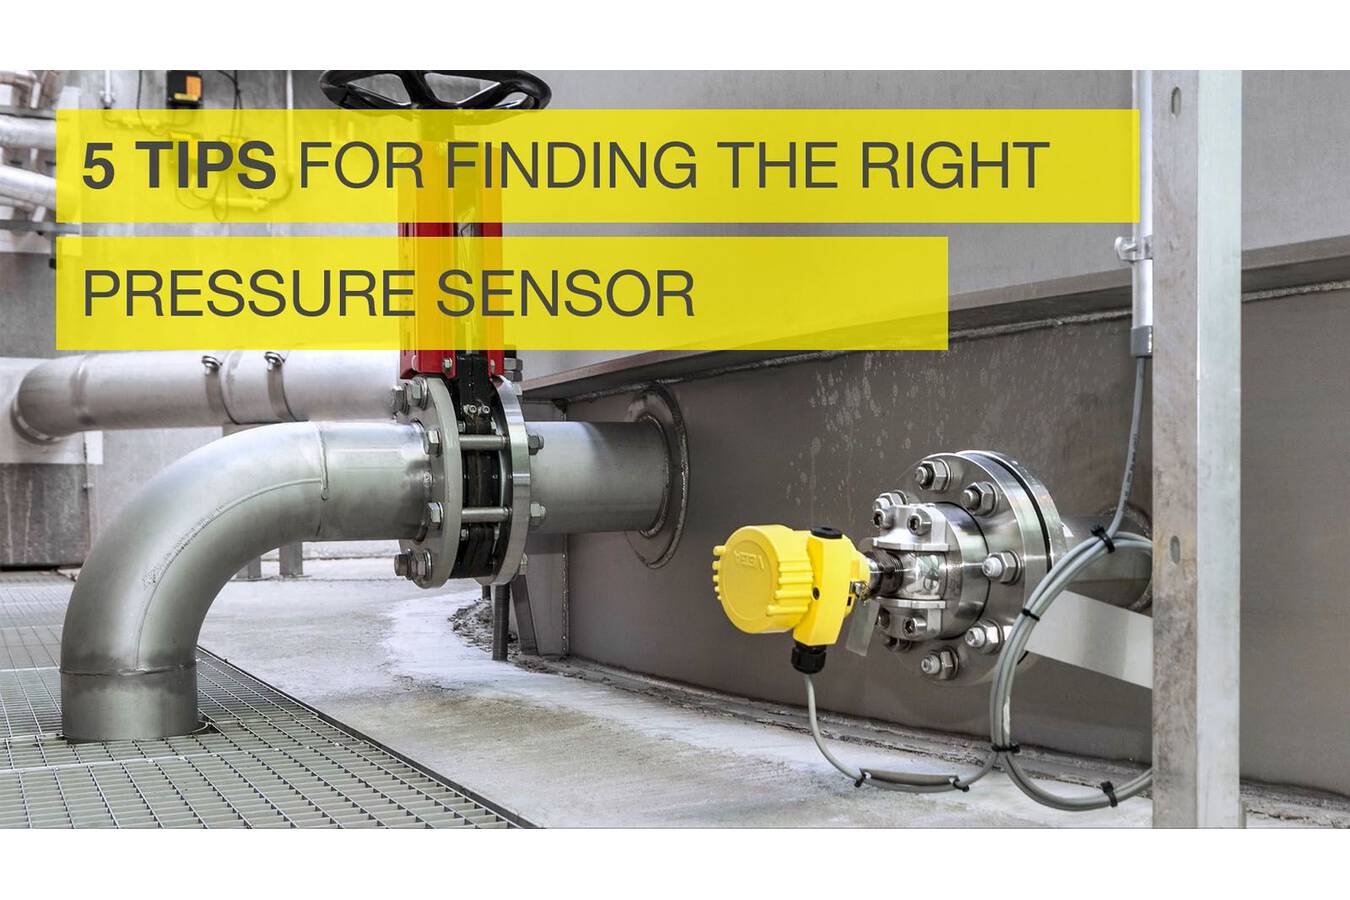 Our 5 tips for finding the right pressure sensor 